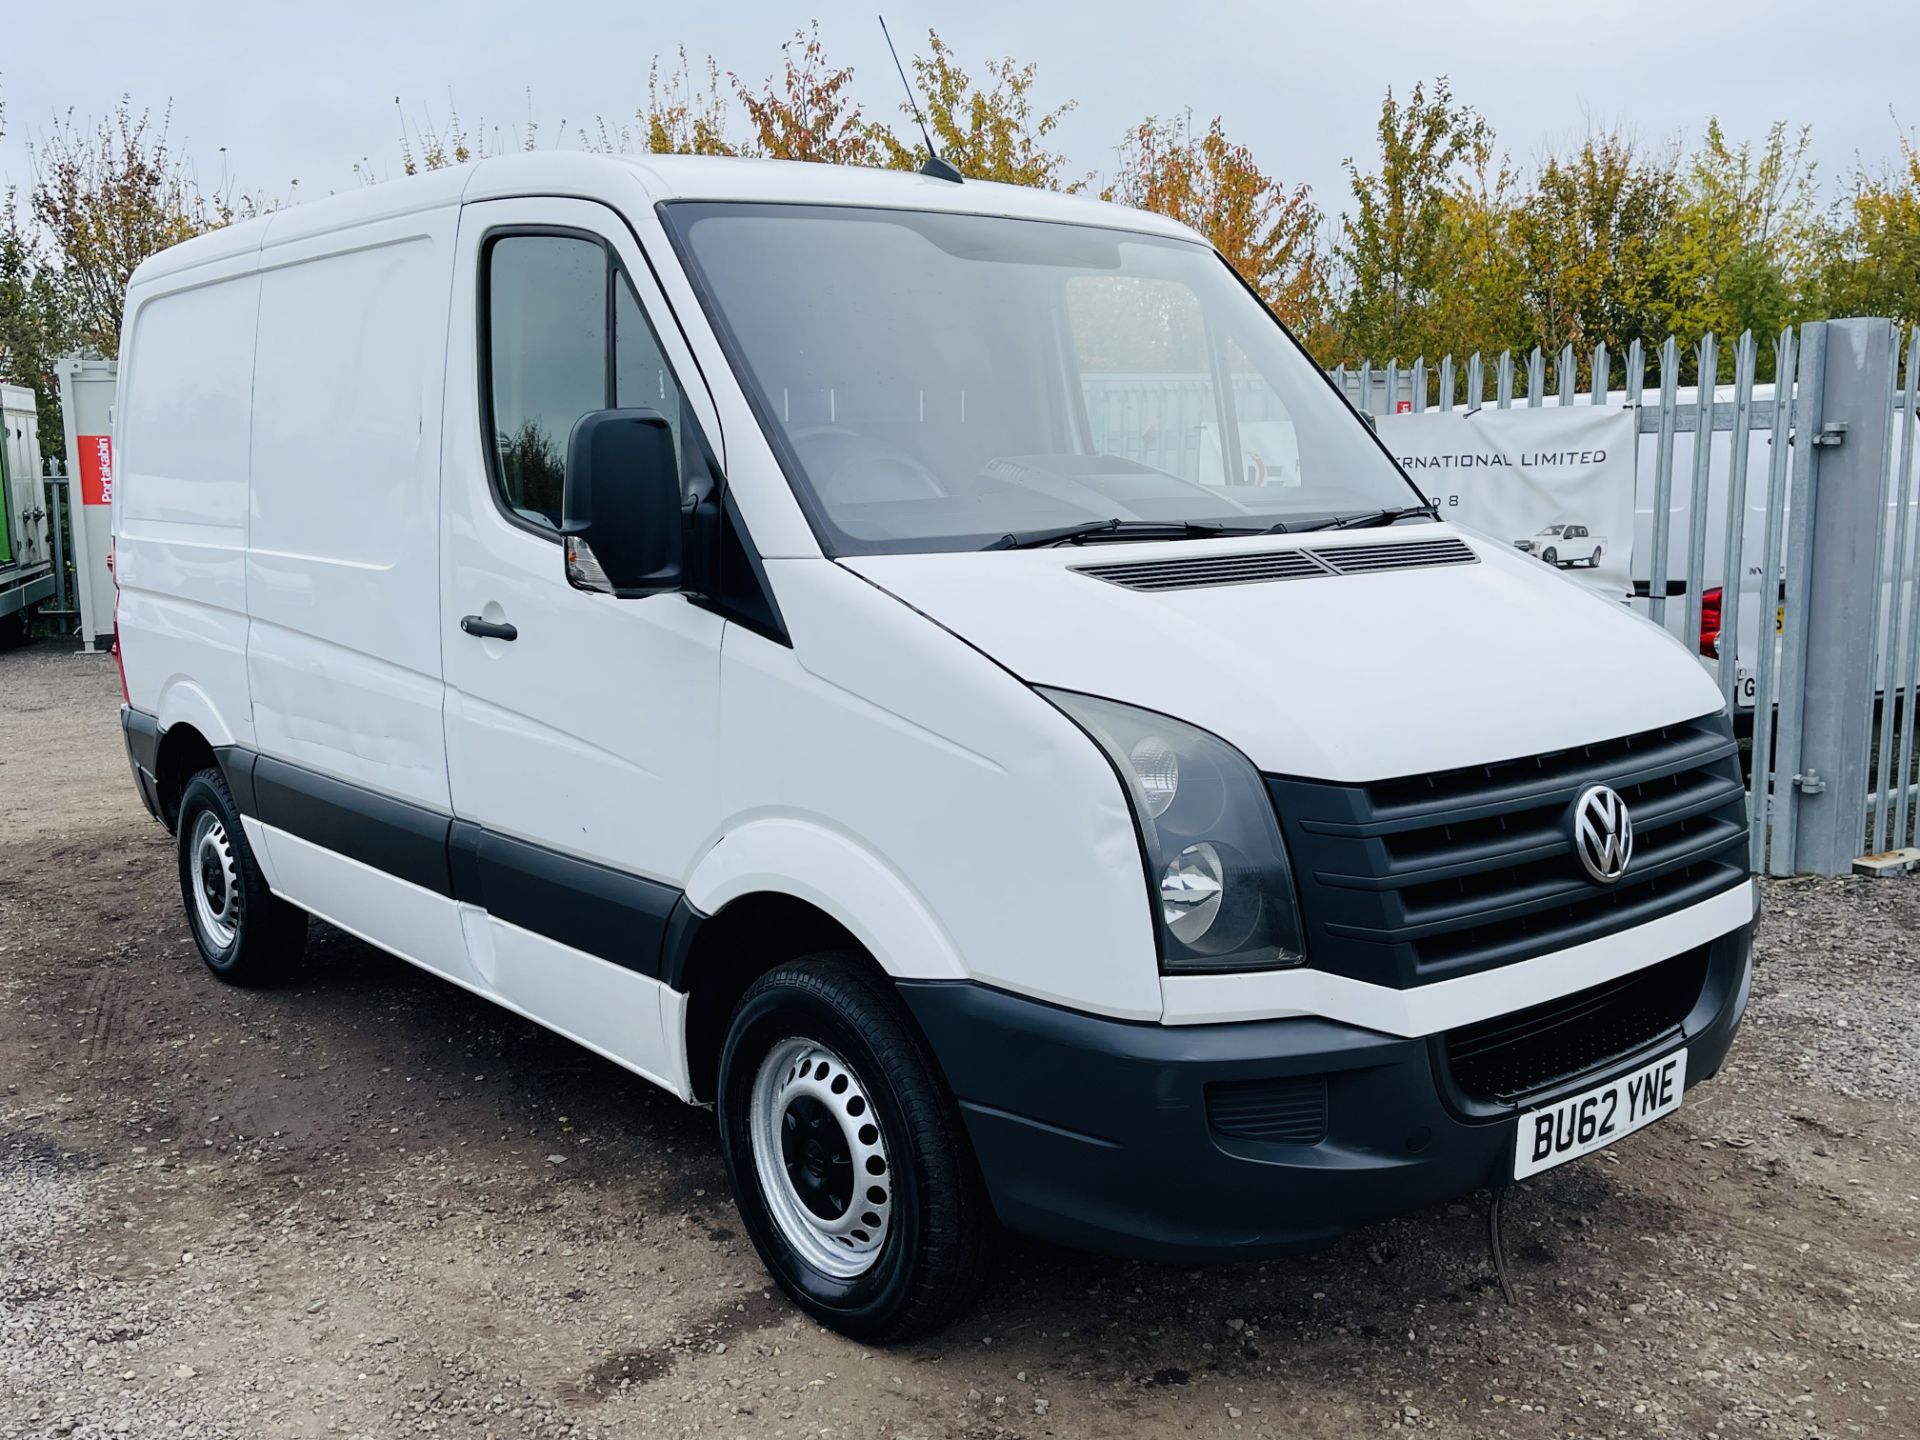 Volkswagen Crafter CR30 2.0 TDI 109 L1 H1 2012 ' 62 Reg' - Air Con - No Vat Save 20% - Image 2 of 19